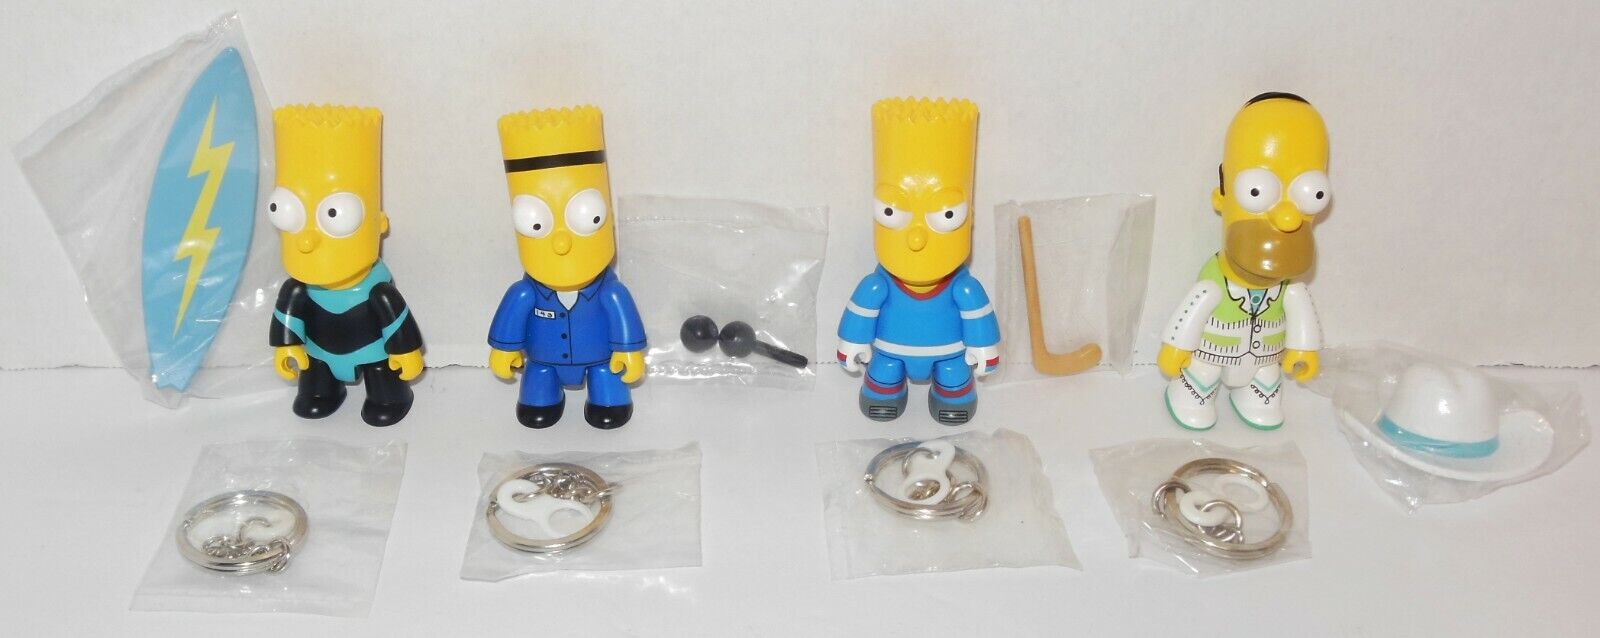 The Simpsons: Bart & Homer (4) QEE Key chain figures lot - - FREE SHIPPING